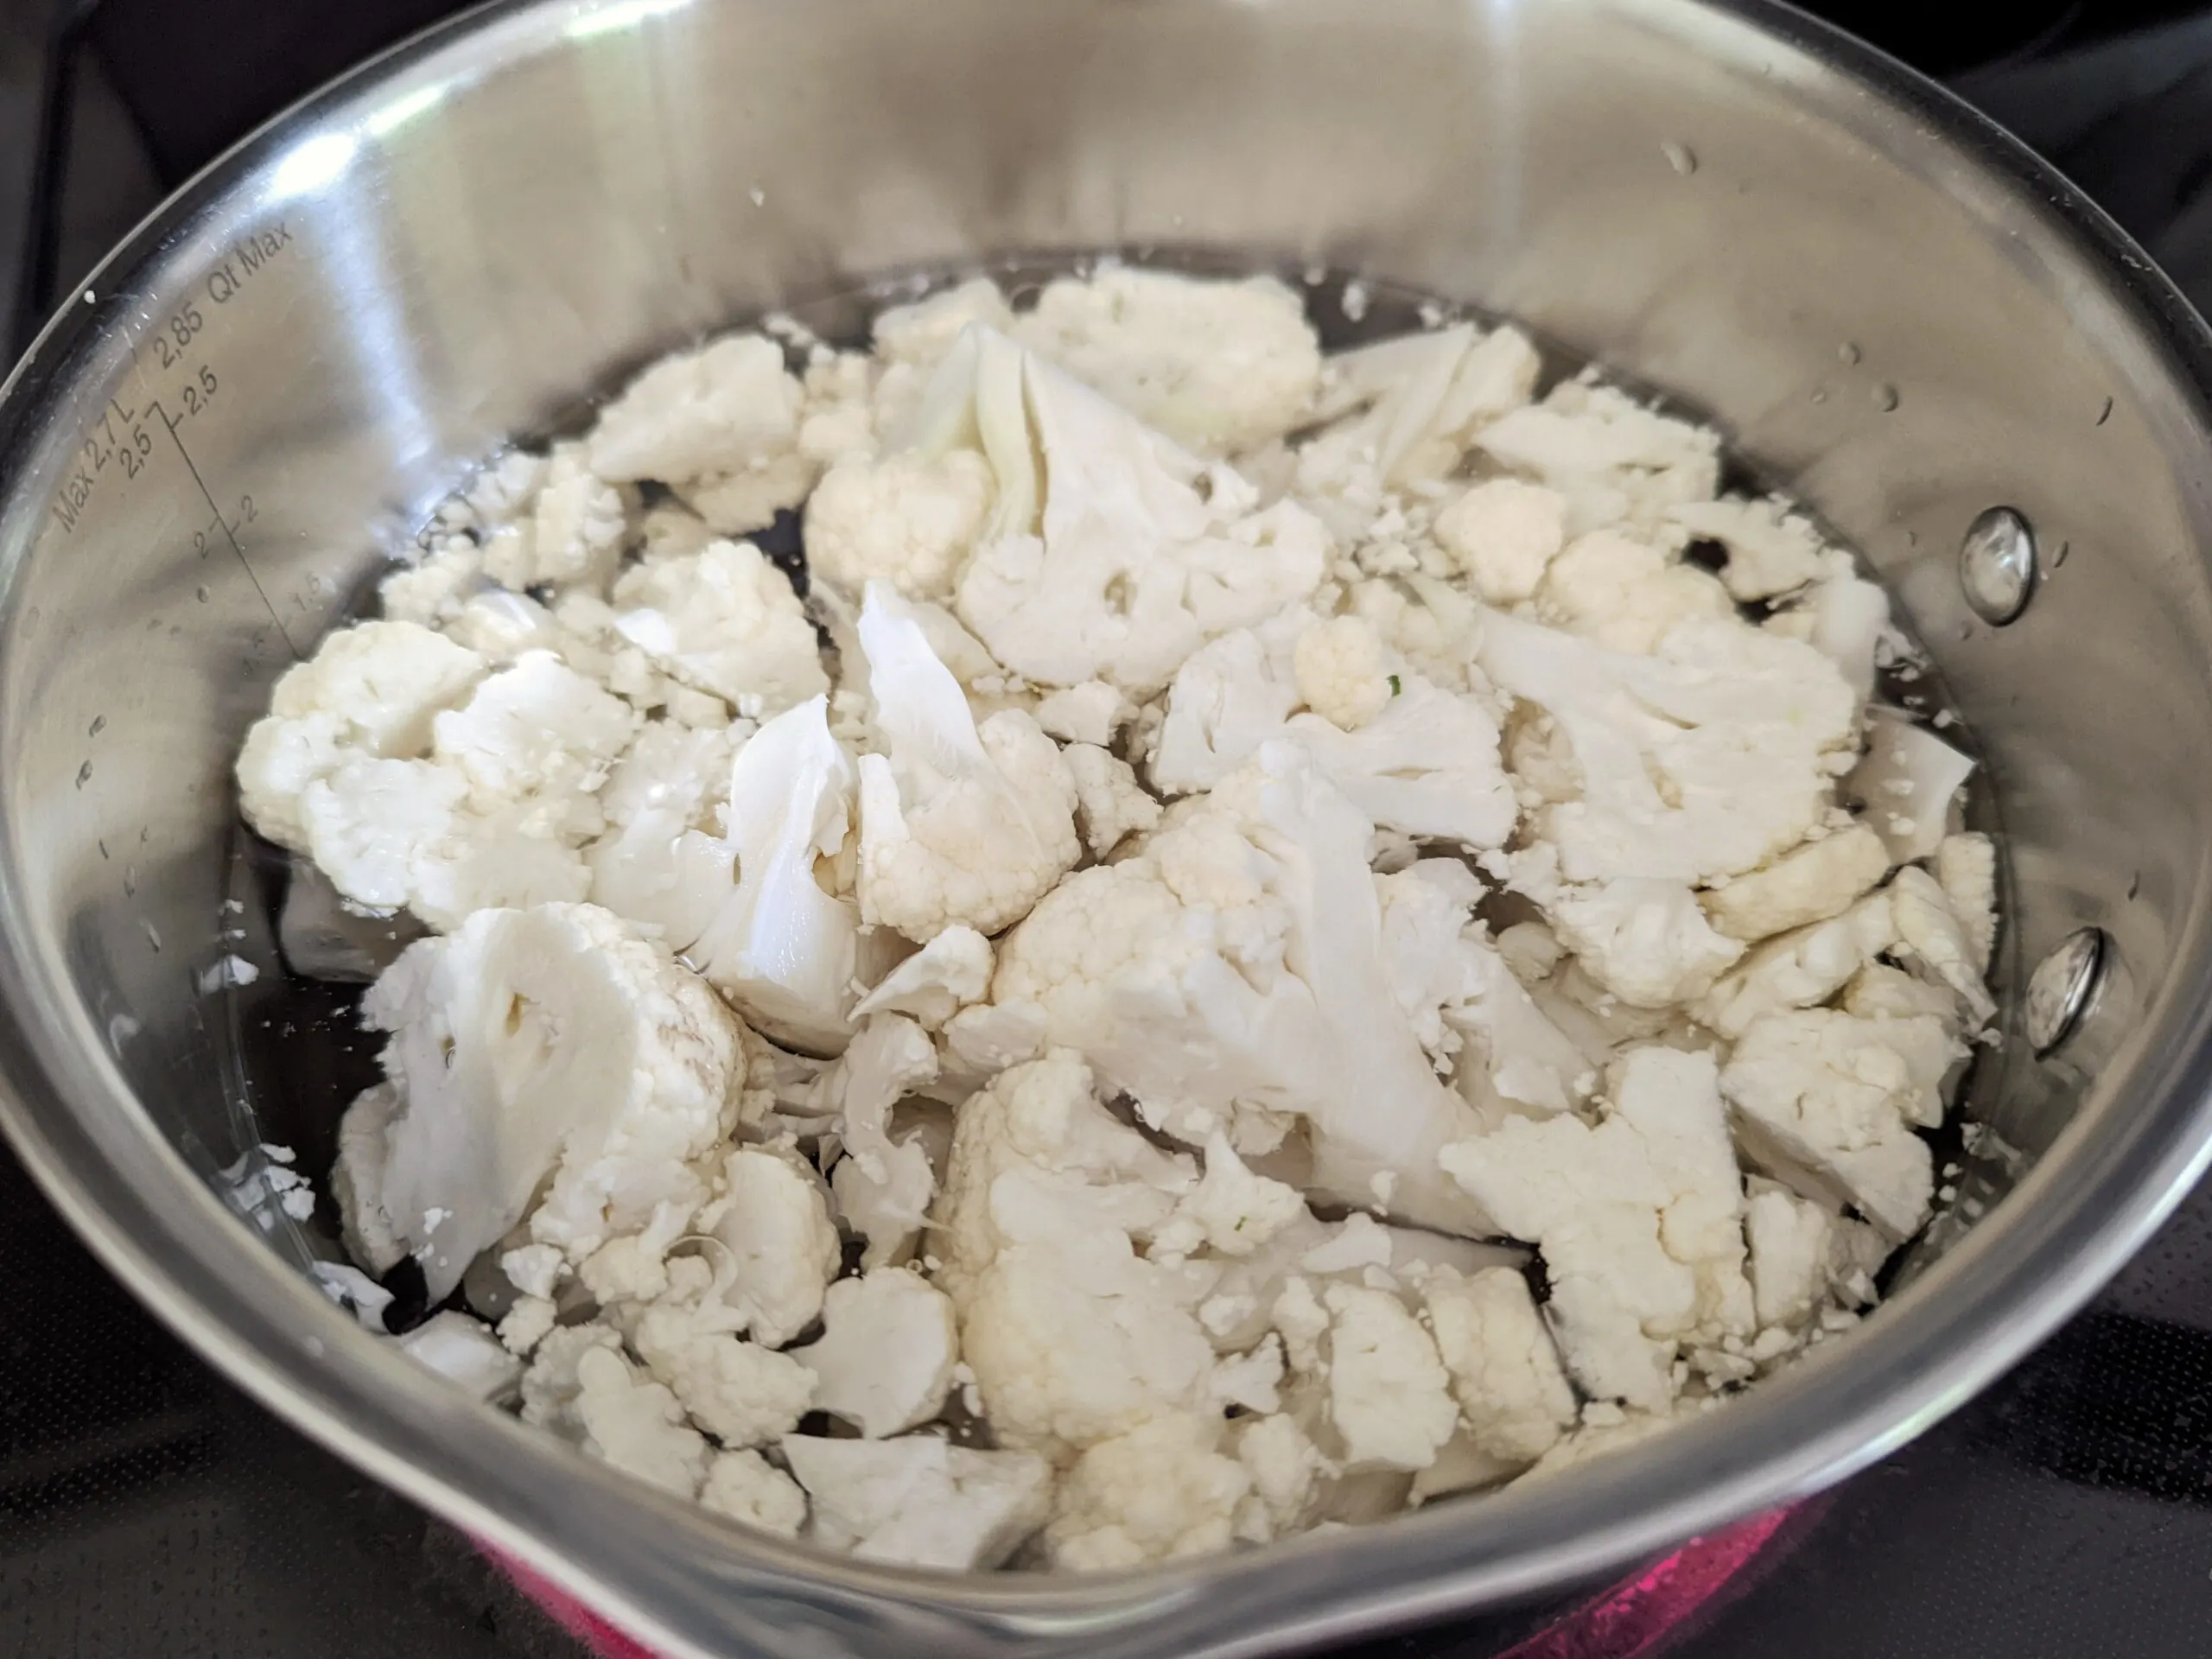 Begin by breaking down a cauliflower head and boil the smaller pieces until they are tender.